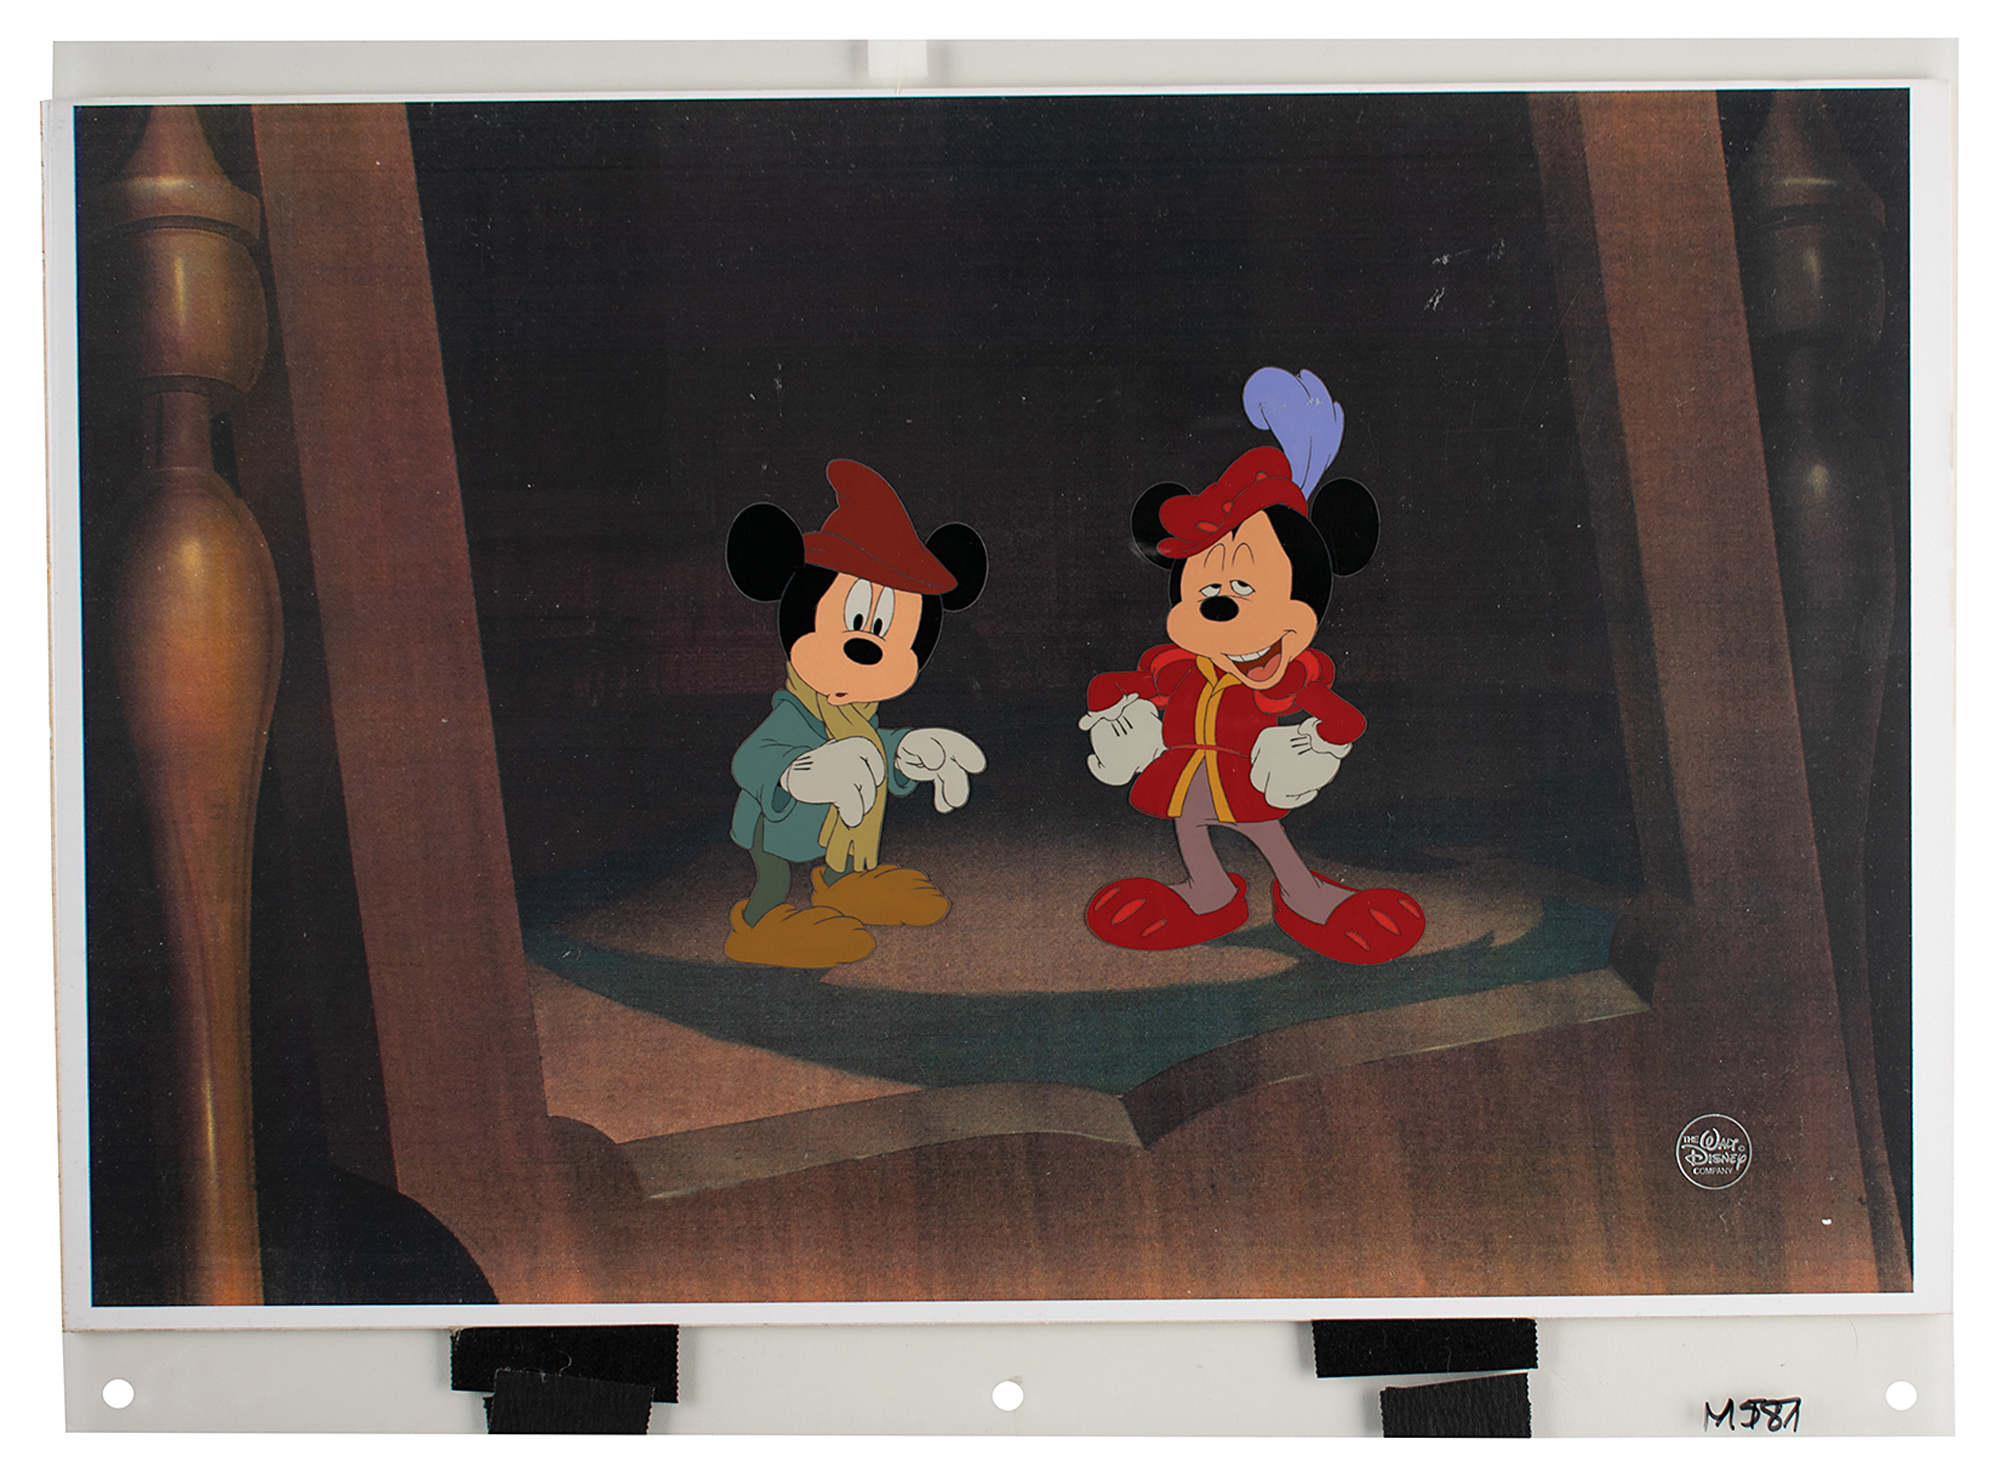 Lot #1022 Mickey Mouse production cels from The Prince and the Pauper